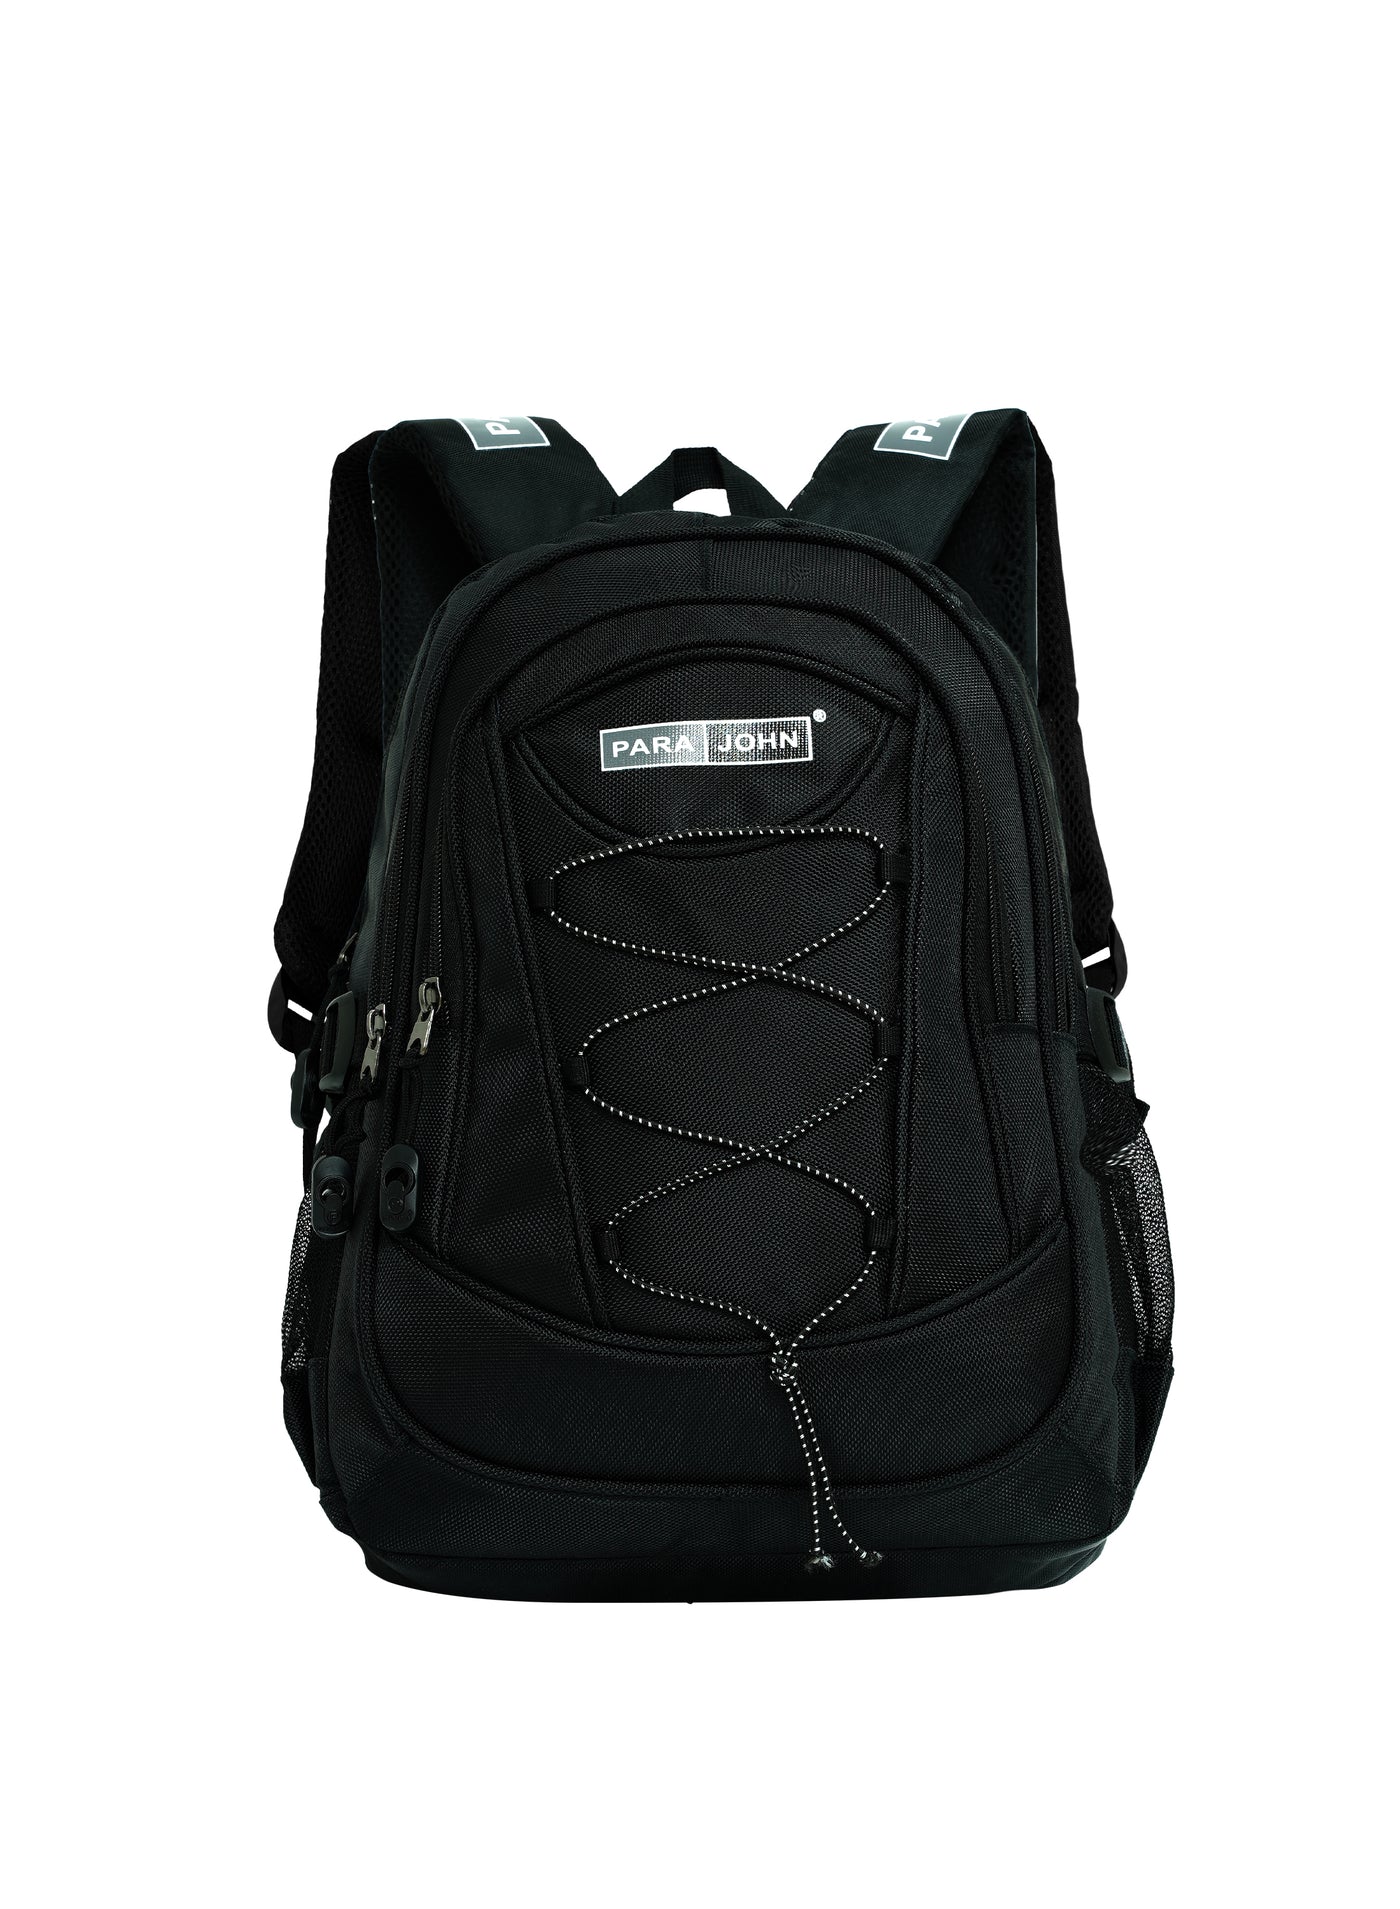 Classic Students School Backpack Black 18 Inch